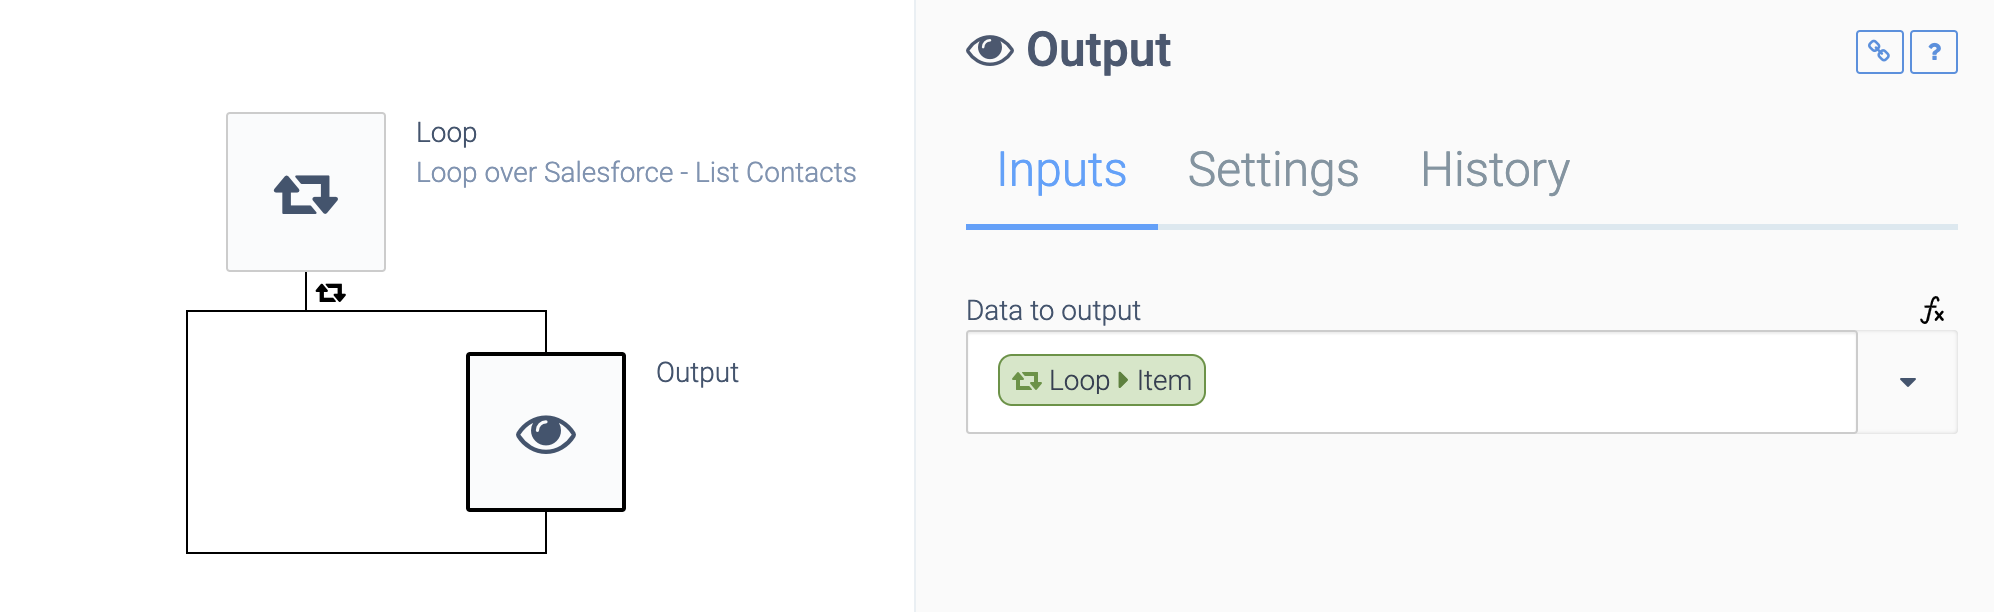 A Loop block containing an Output block. The Output block is selected. The Data to output is set to Loop > Item.